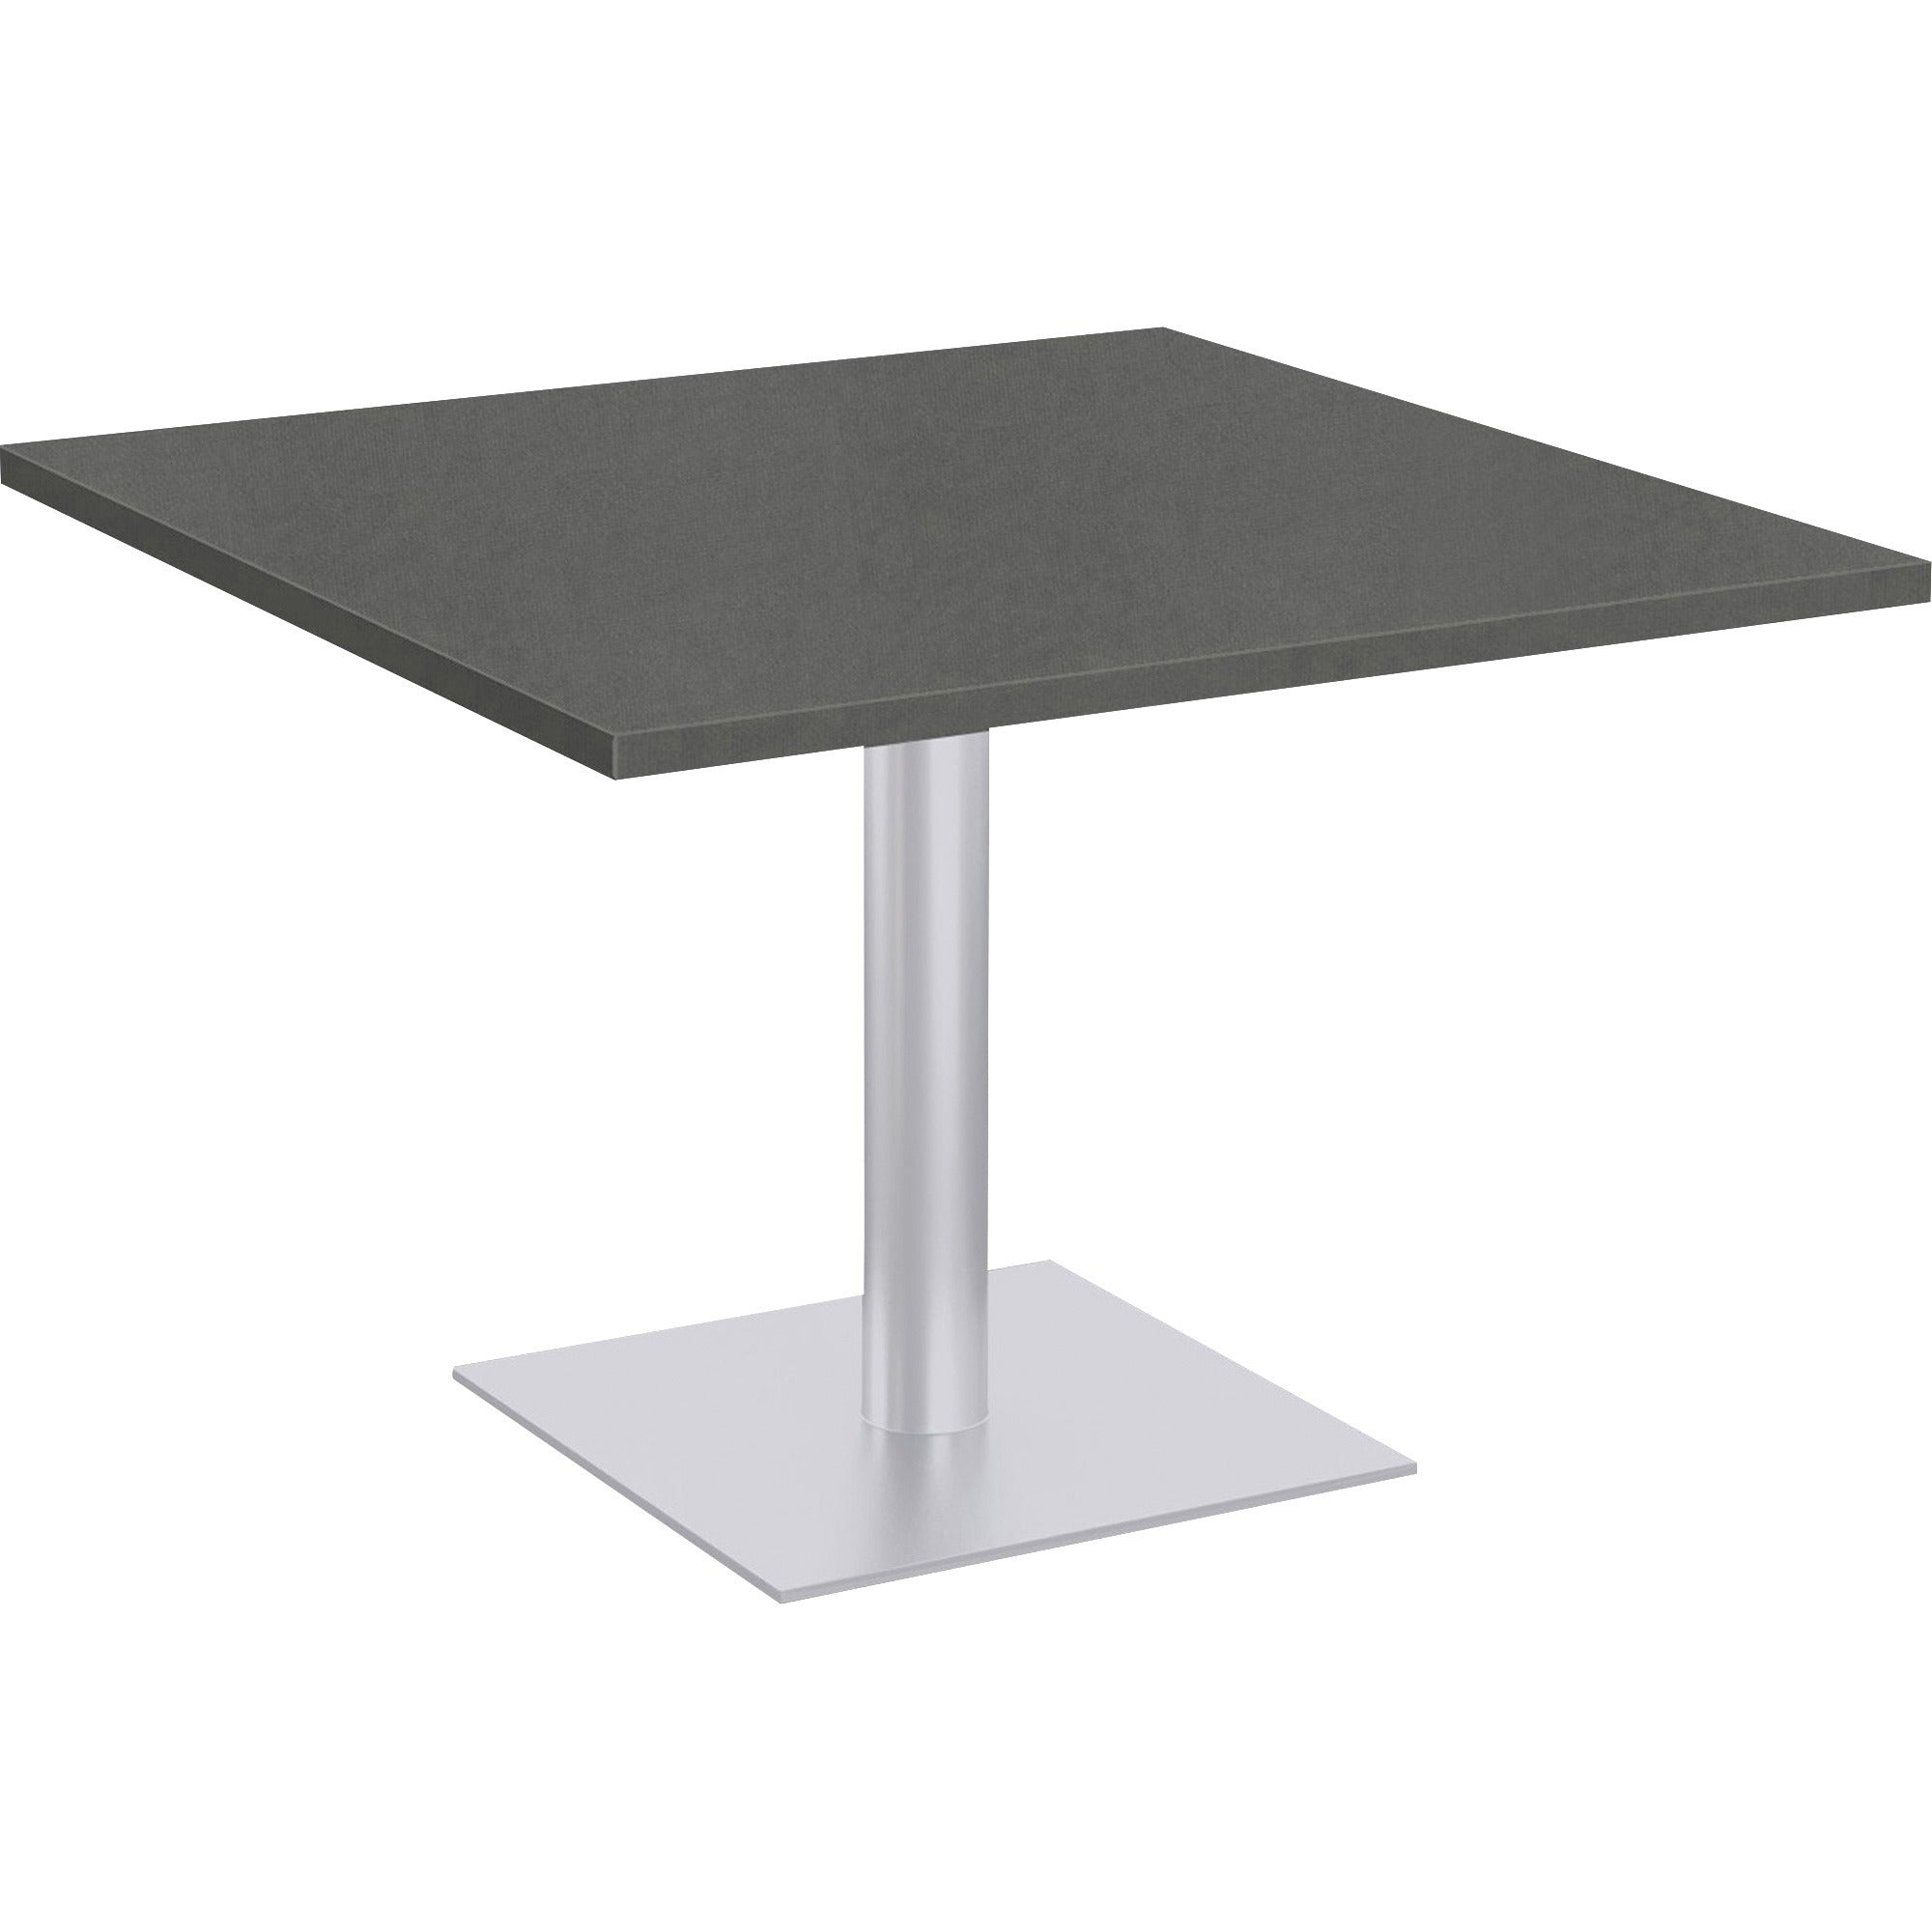 special-t-sienna-cafe-table-for-table-topgray-square-top-powder-coated-metallic-silver-base-x-36-table-top-width-x-36-table-top-depth-x-125-table-top-thickness-assembly-required-high-pressure-laminate-hpl-particleboard-top-material_sctsien3636sm - 1